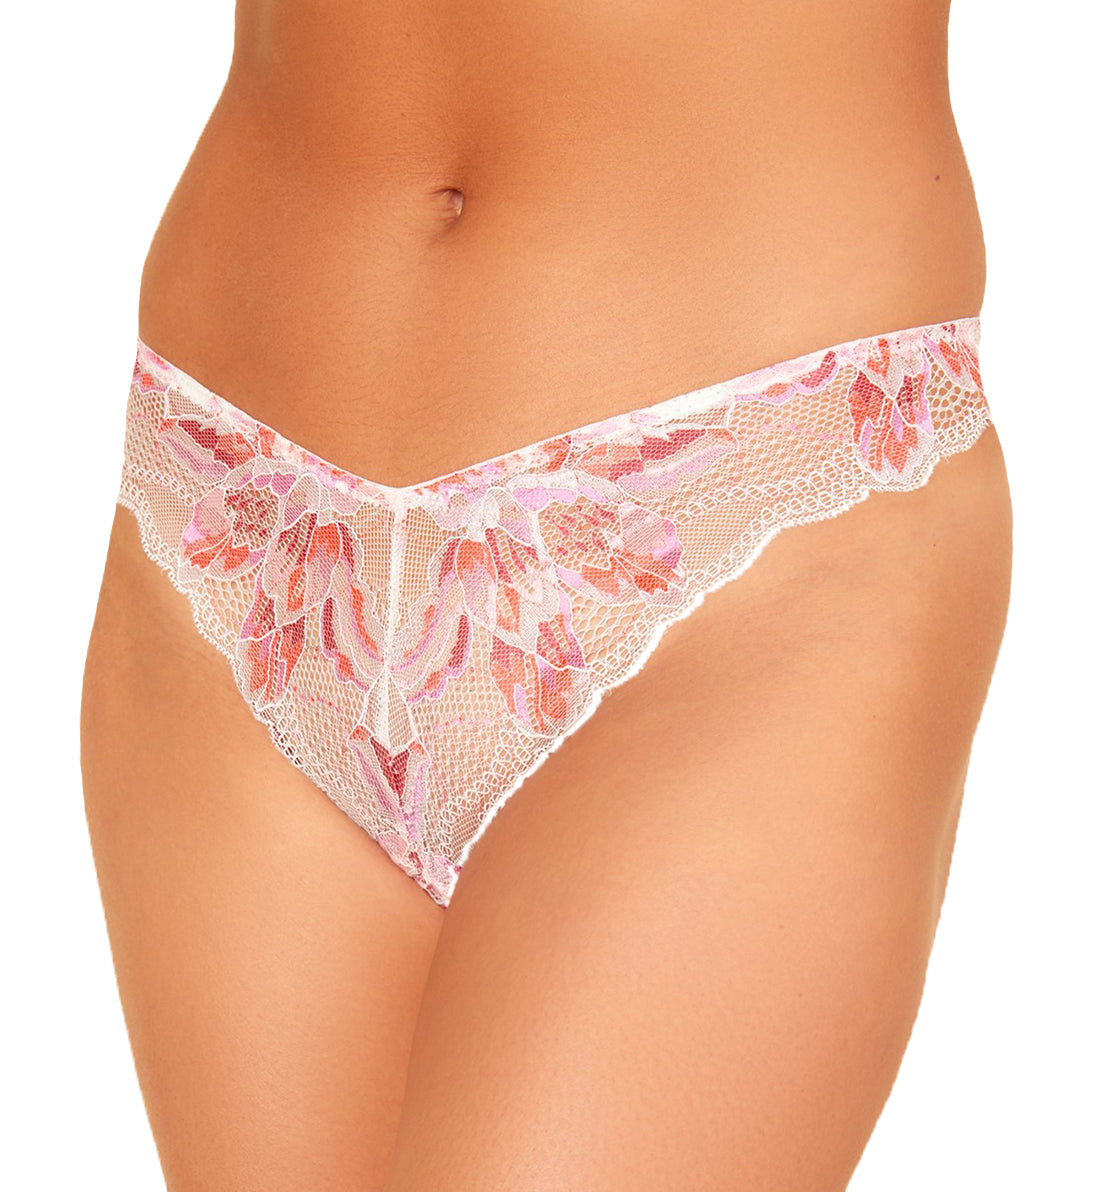 Cosabella Paradiso Low Rise Thong (PARAD0321),S/M,Rossa/White - Rossa/White,S/M